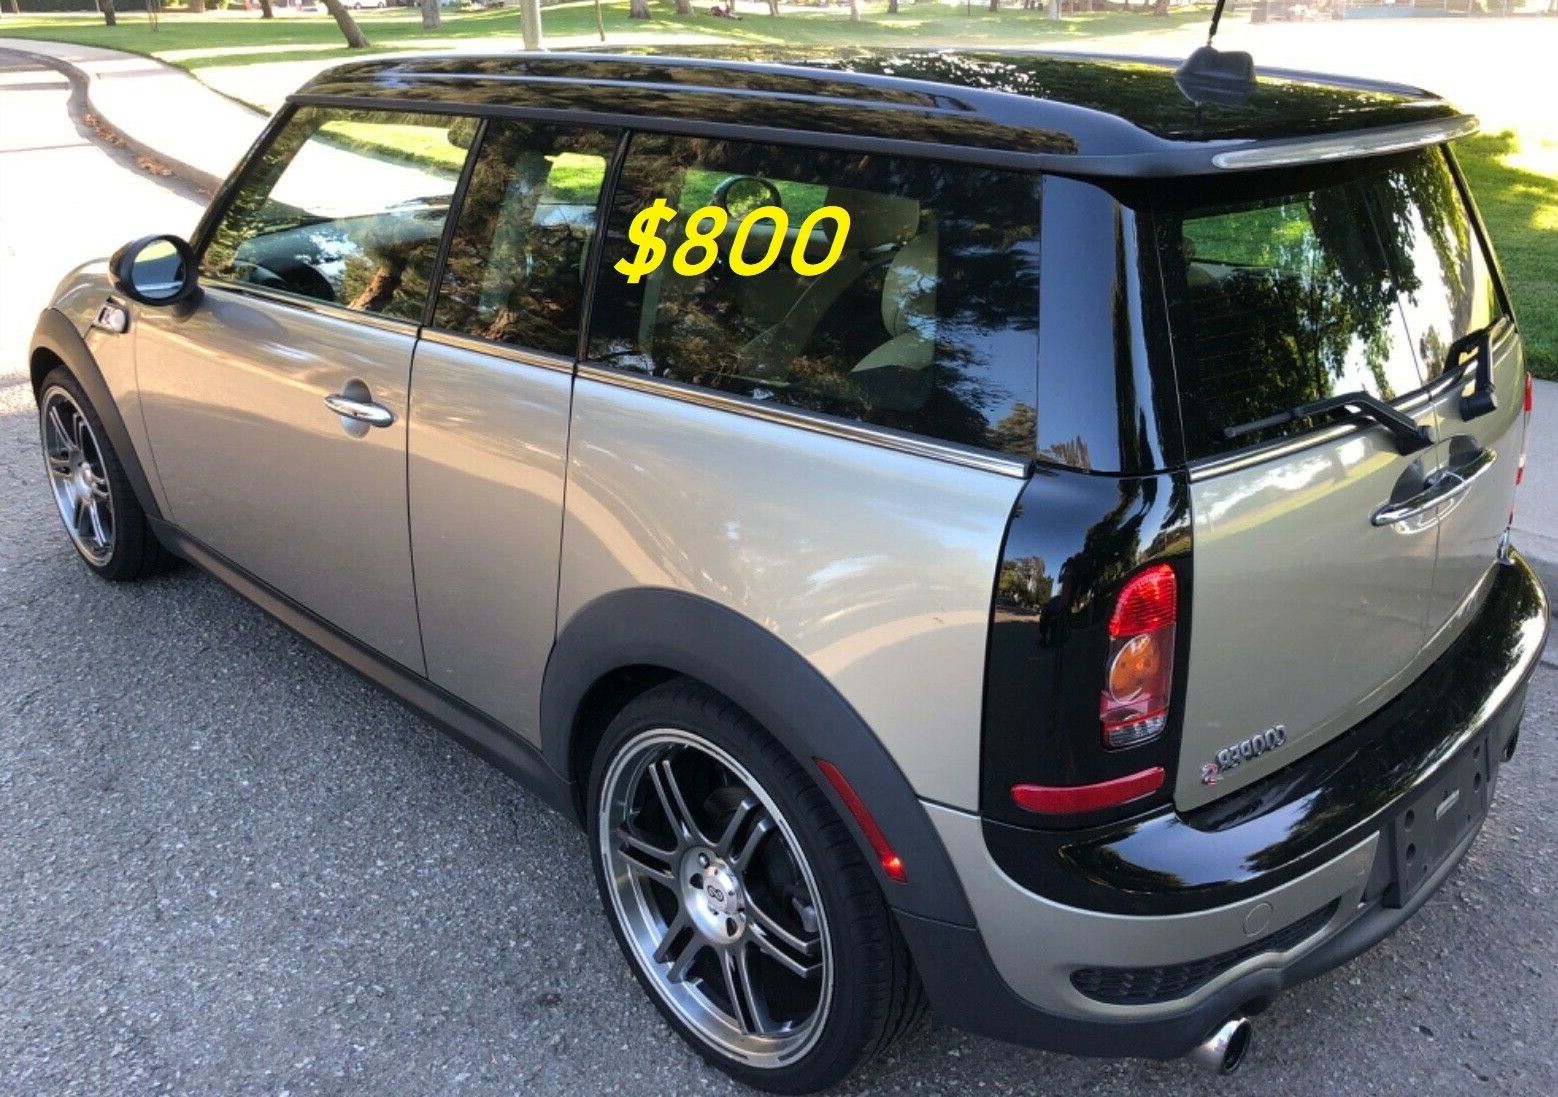 $800 URGENT! I Selling 2009 MINI Cooper Clubman S,Very Clean!Clean Tittle!Runs and Drives great.Nice Family car!one owner!!